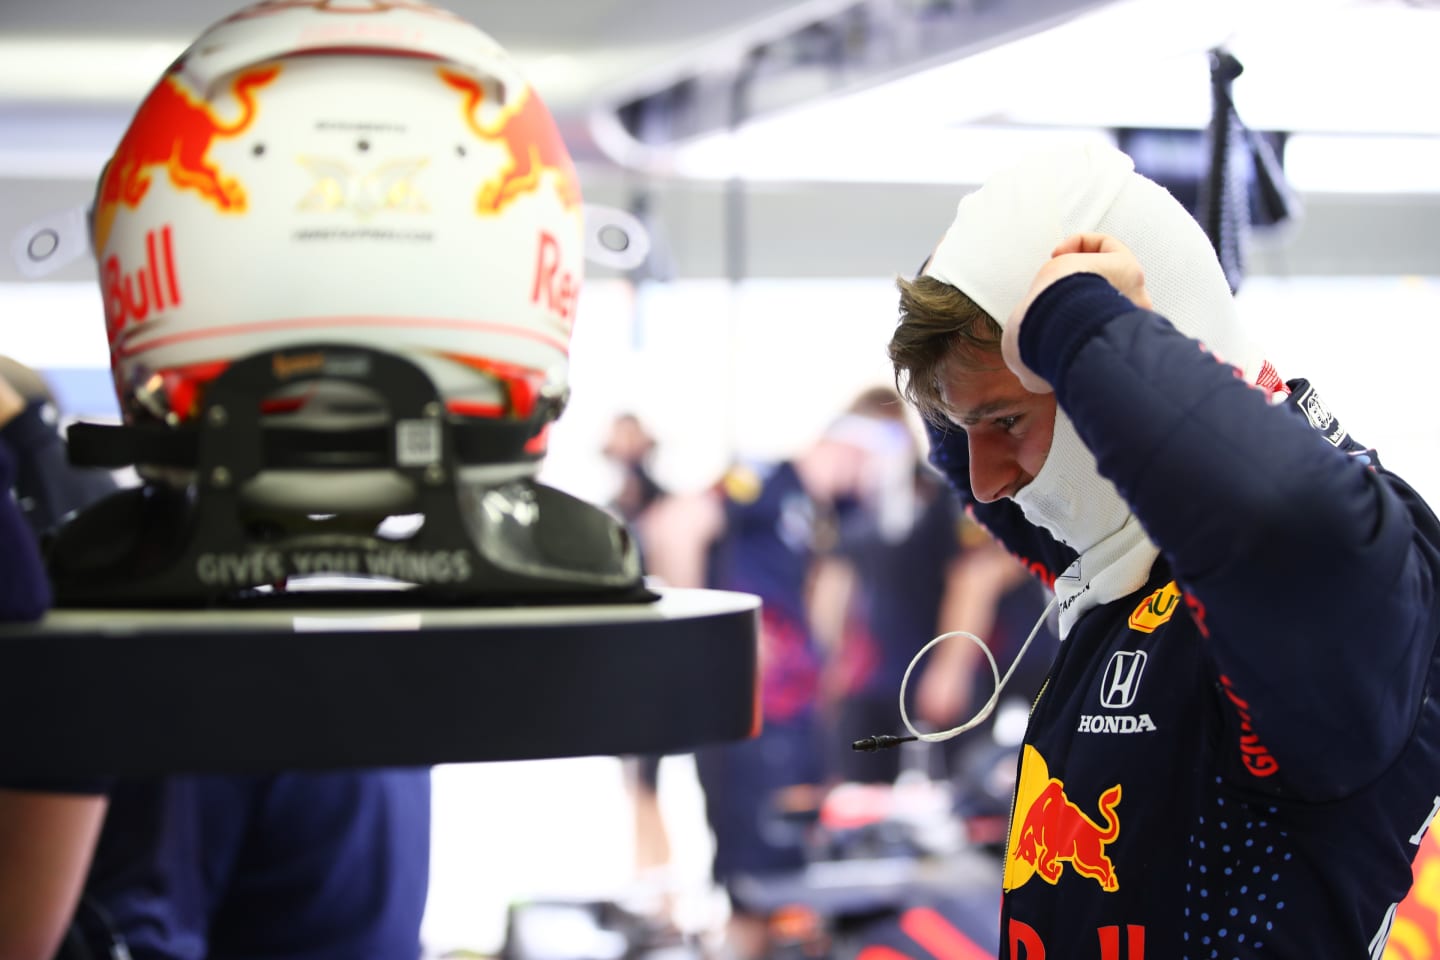 Verstappen set more than 122 laps over the day with the highest mileage and lowest time